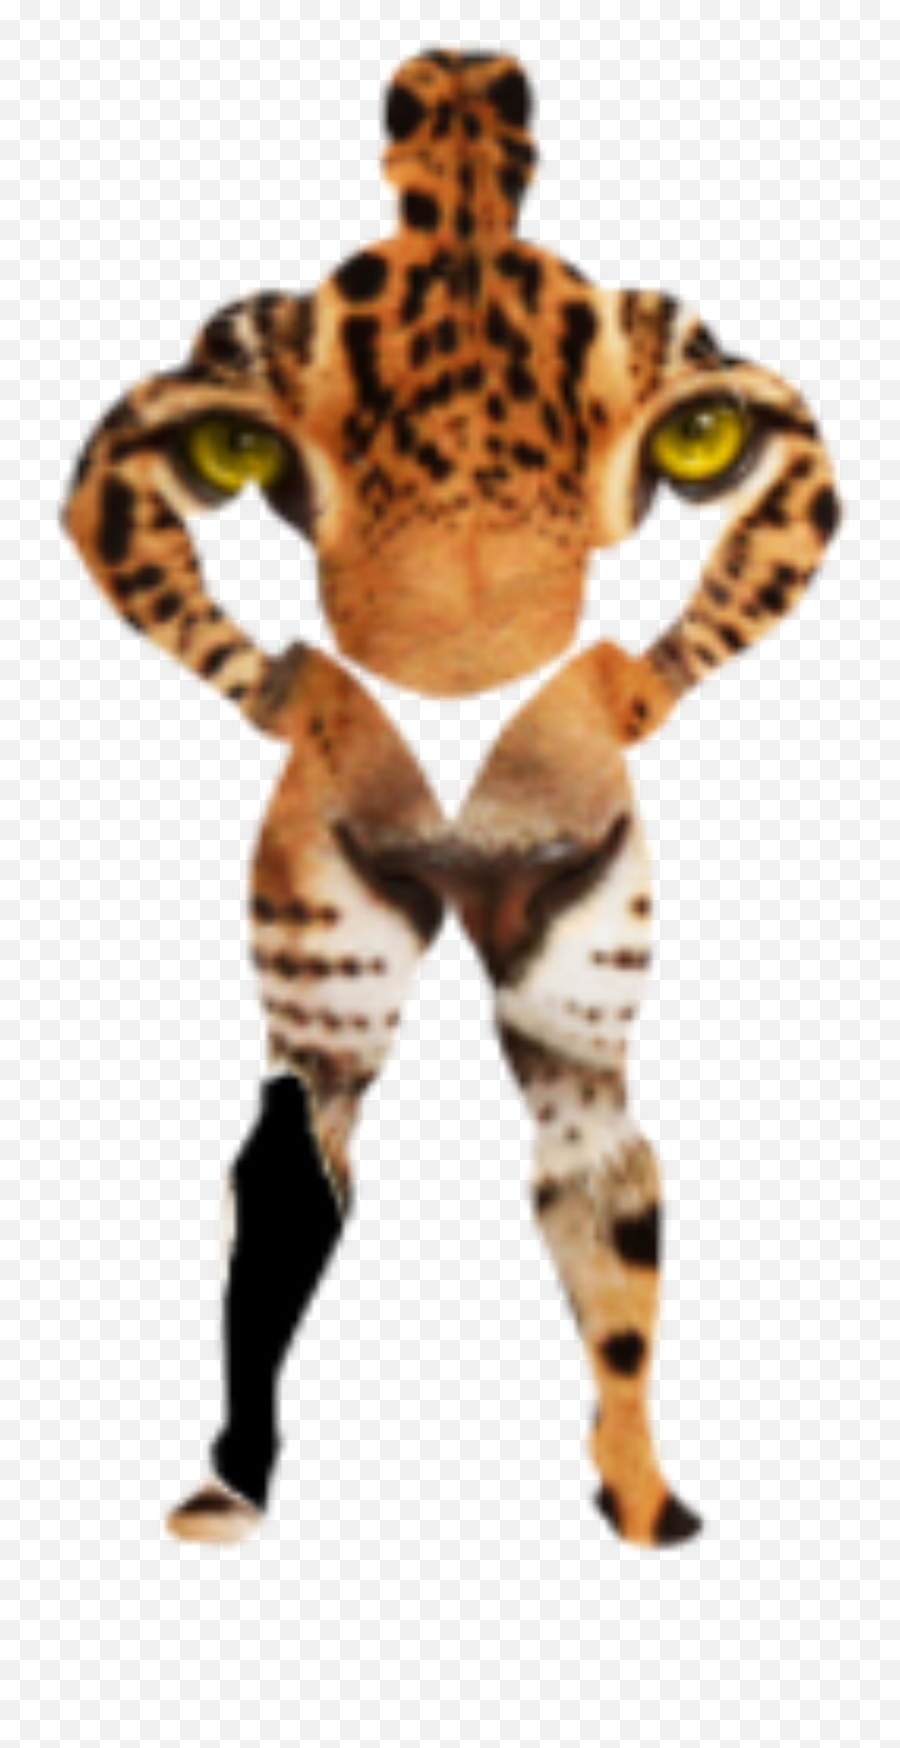 Leopard Png - This Free Icons Png Design Of Leopard In The,Leopard Png